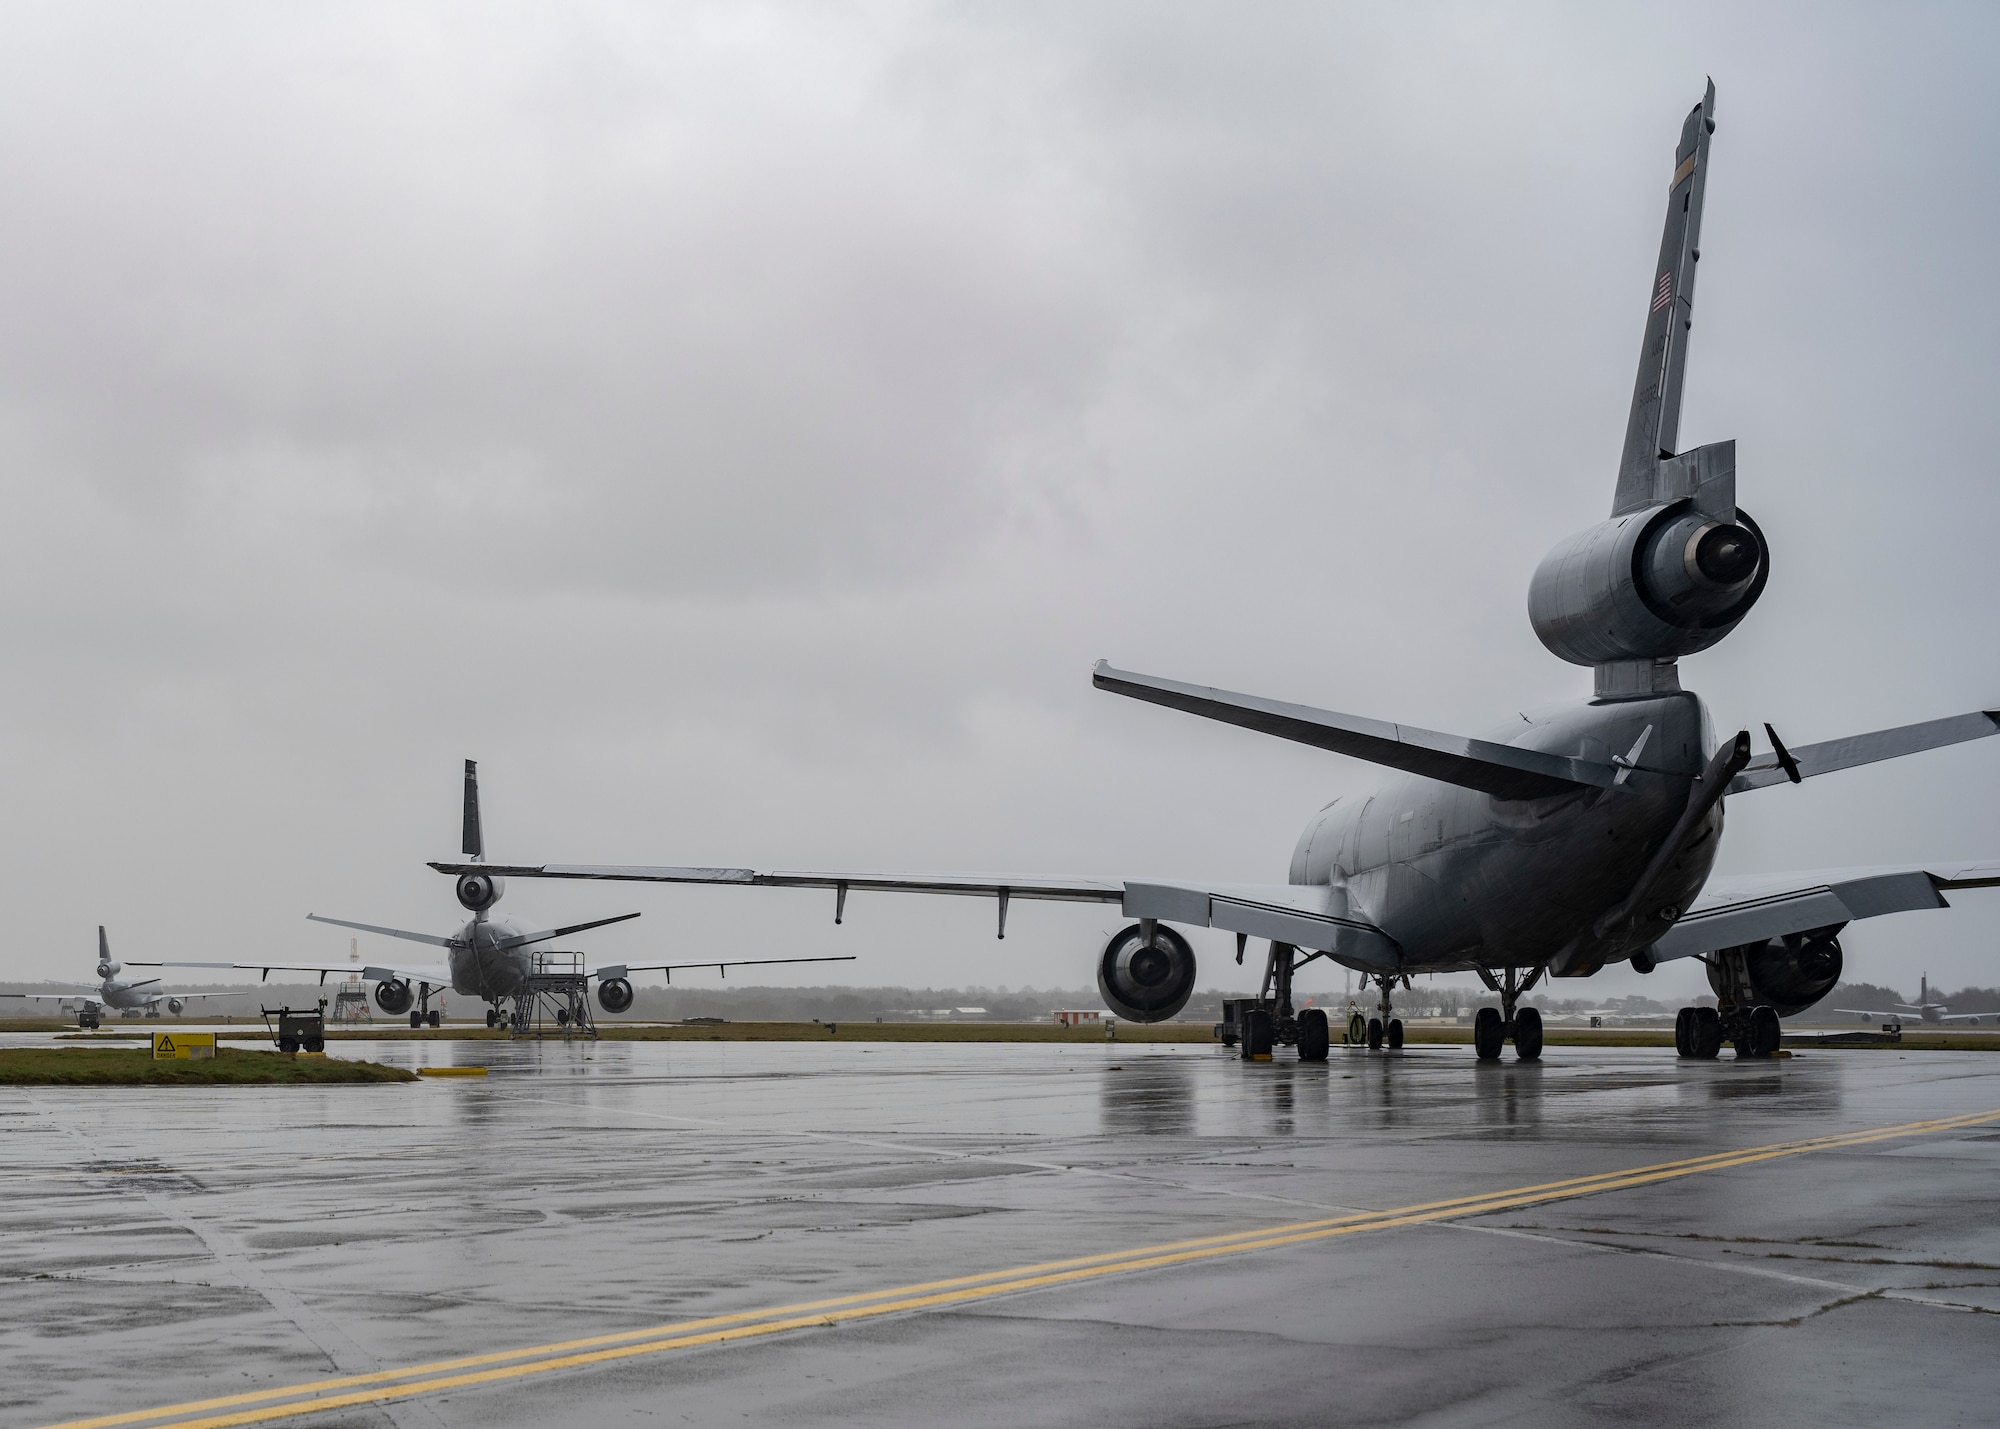 The KC-10 is an Air Mobility Command advanced tanker and cargo aircraft designed to provide increased global mobility for U.S. Armed Forces.